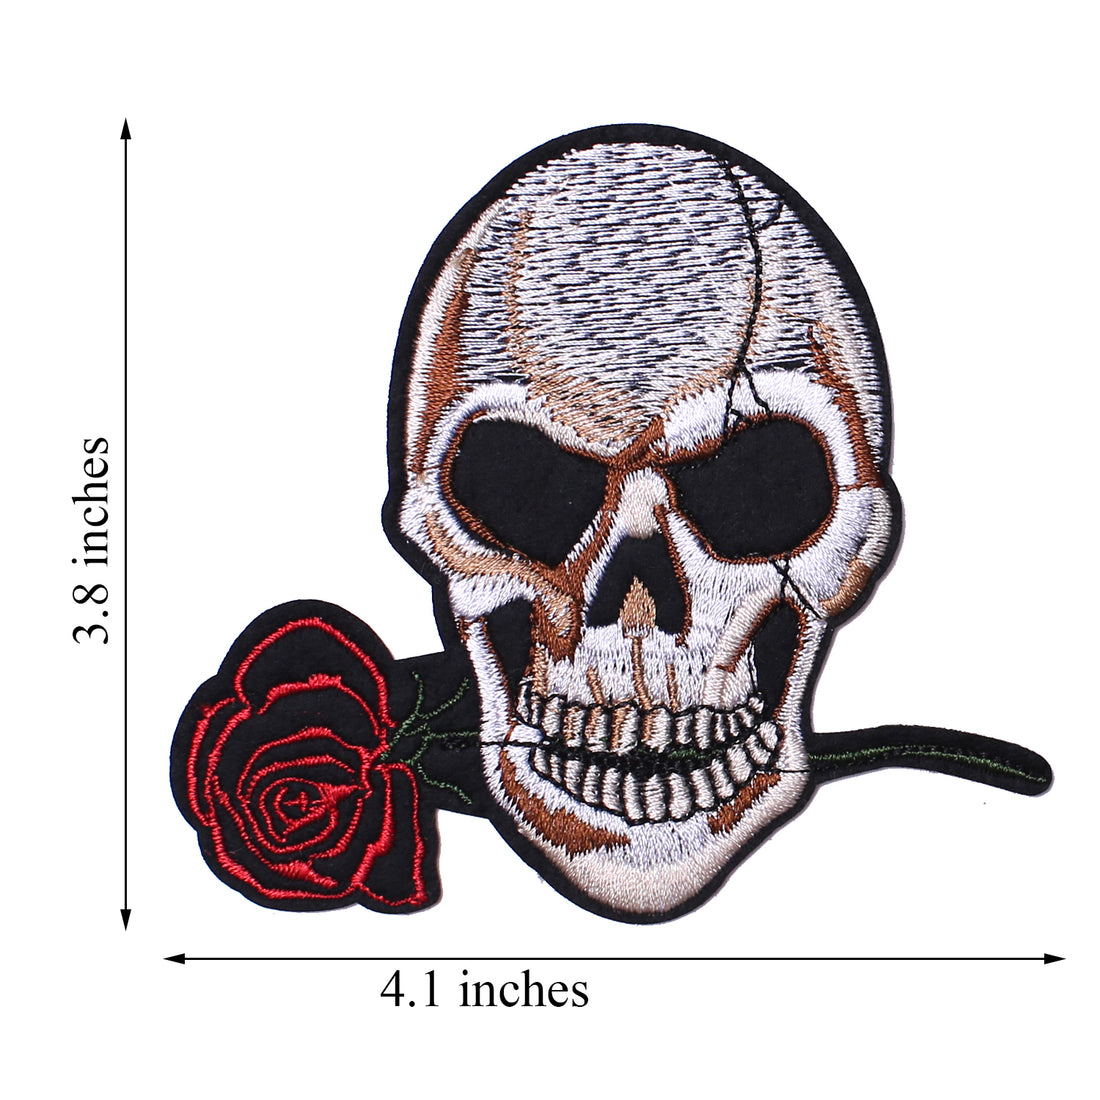 2 Pack American US Flag Patch, Embroidered Sew on Iron on Patches, 2PCS Skull and Roses